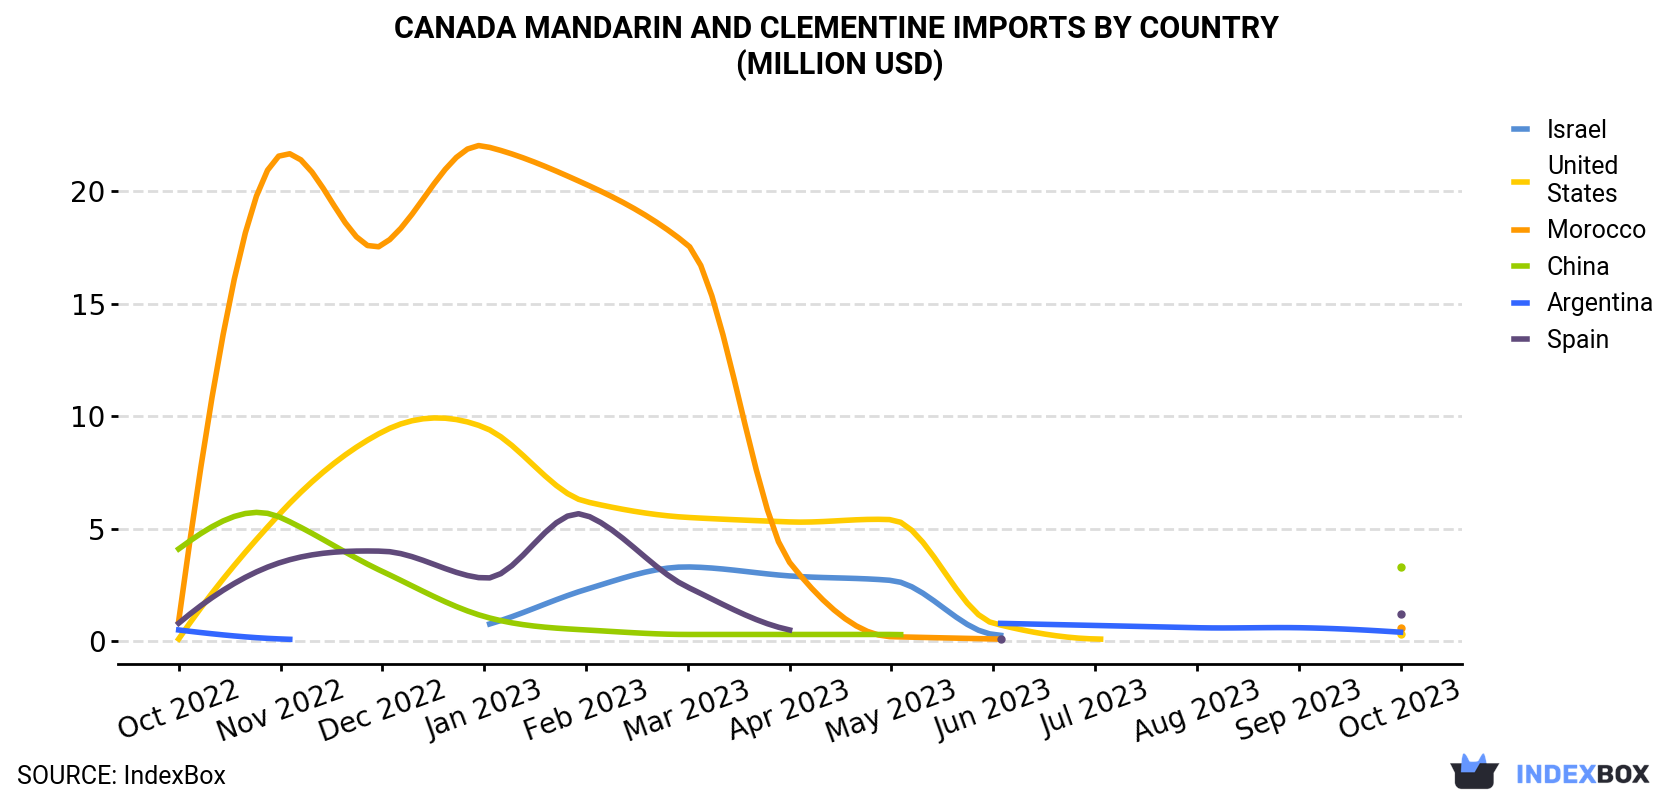 Canada Mandarin and Clementine Imports By Country (Million USD)